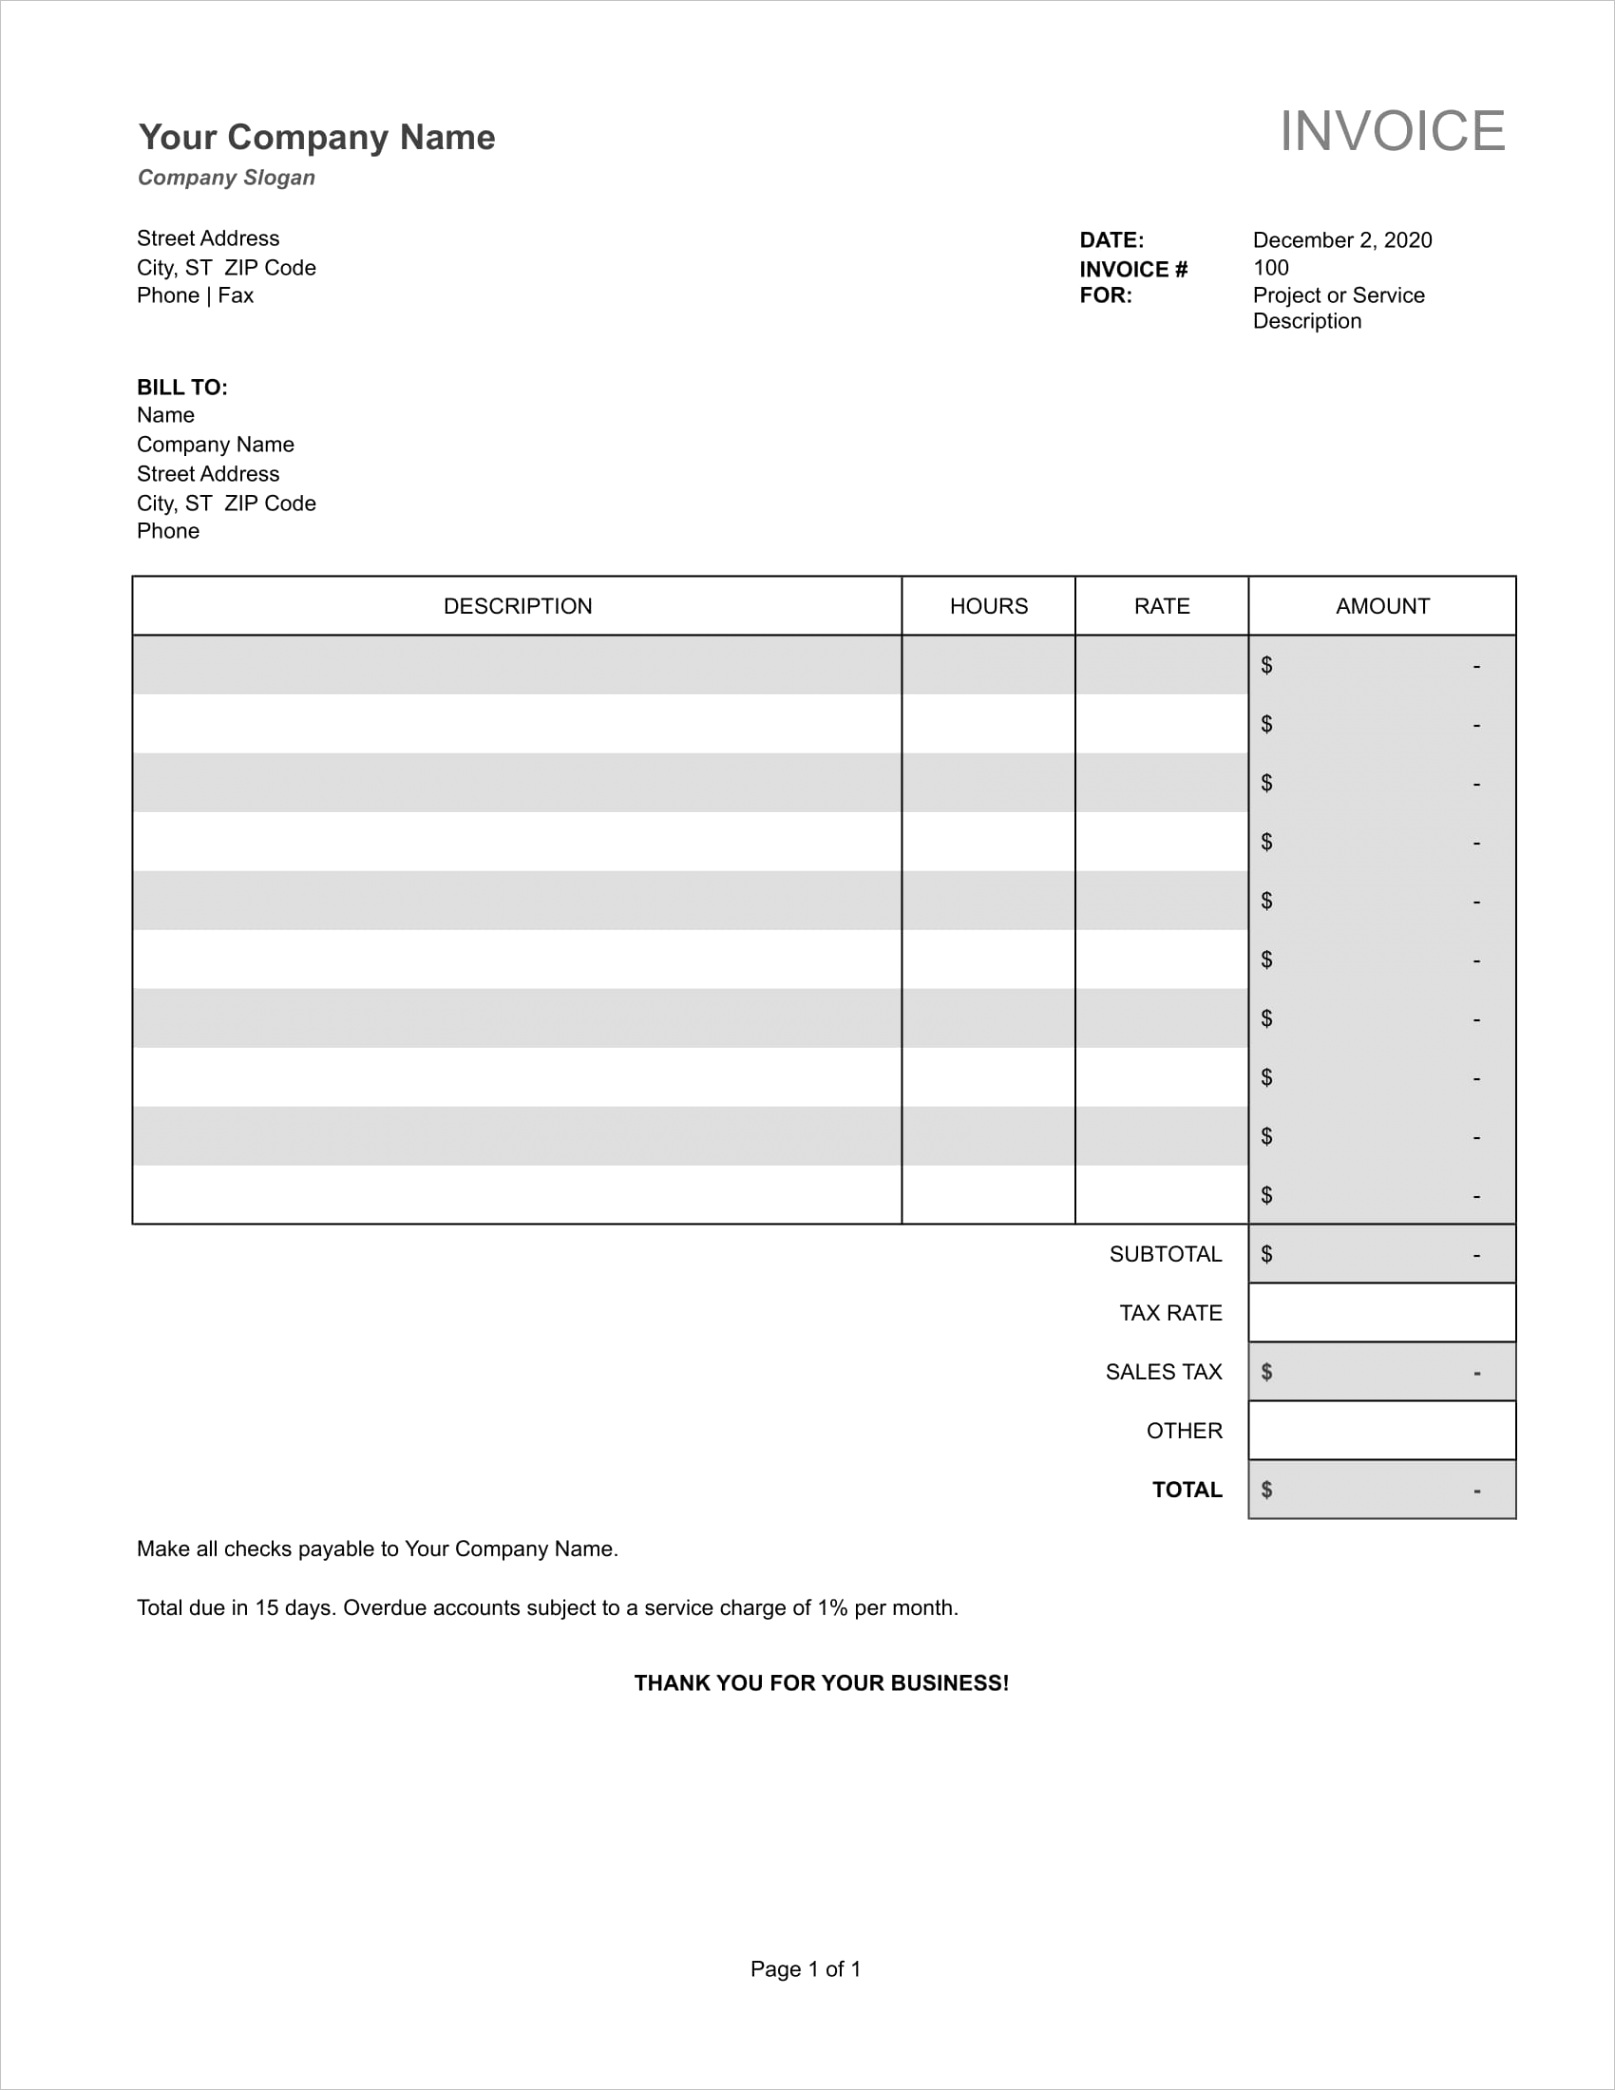 invoice in excel